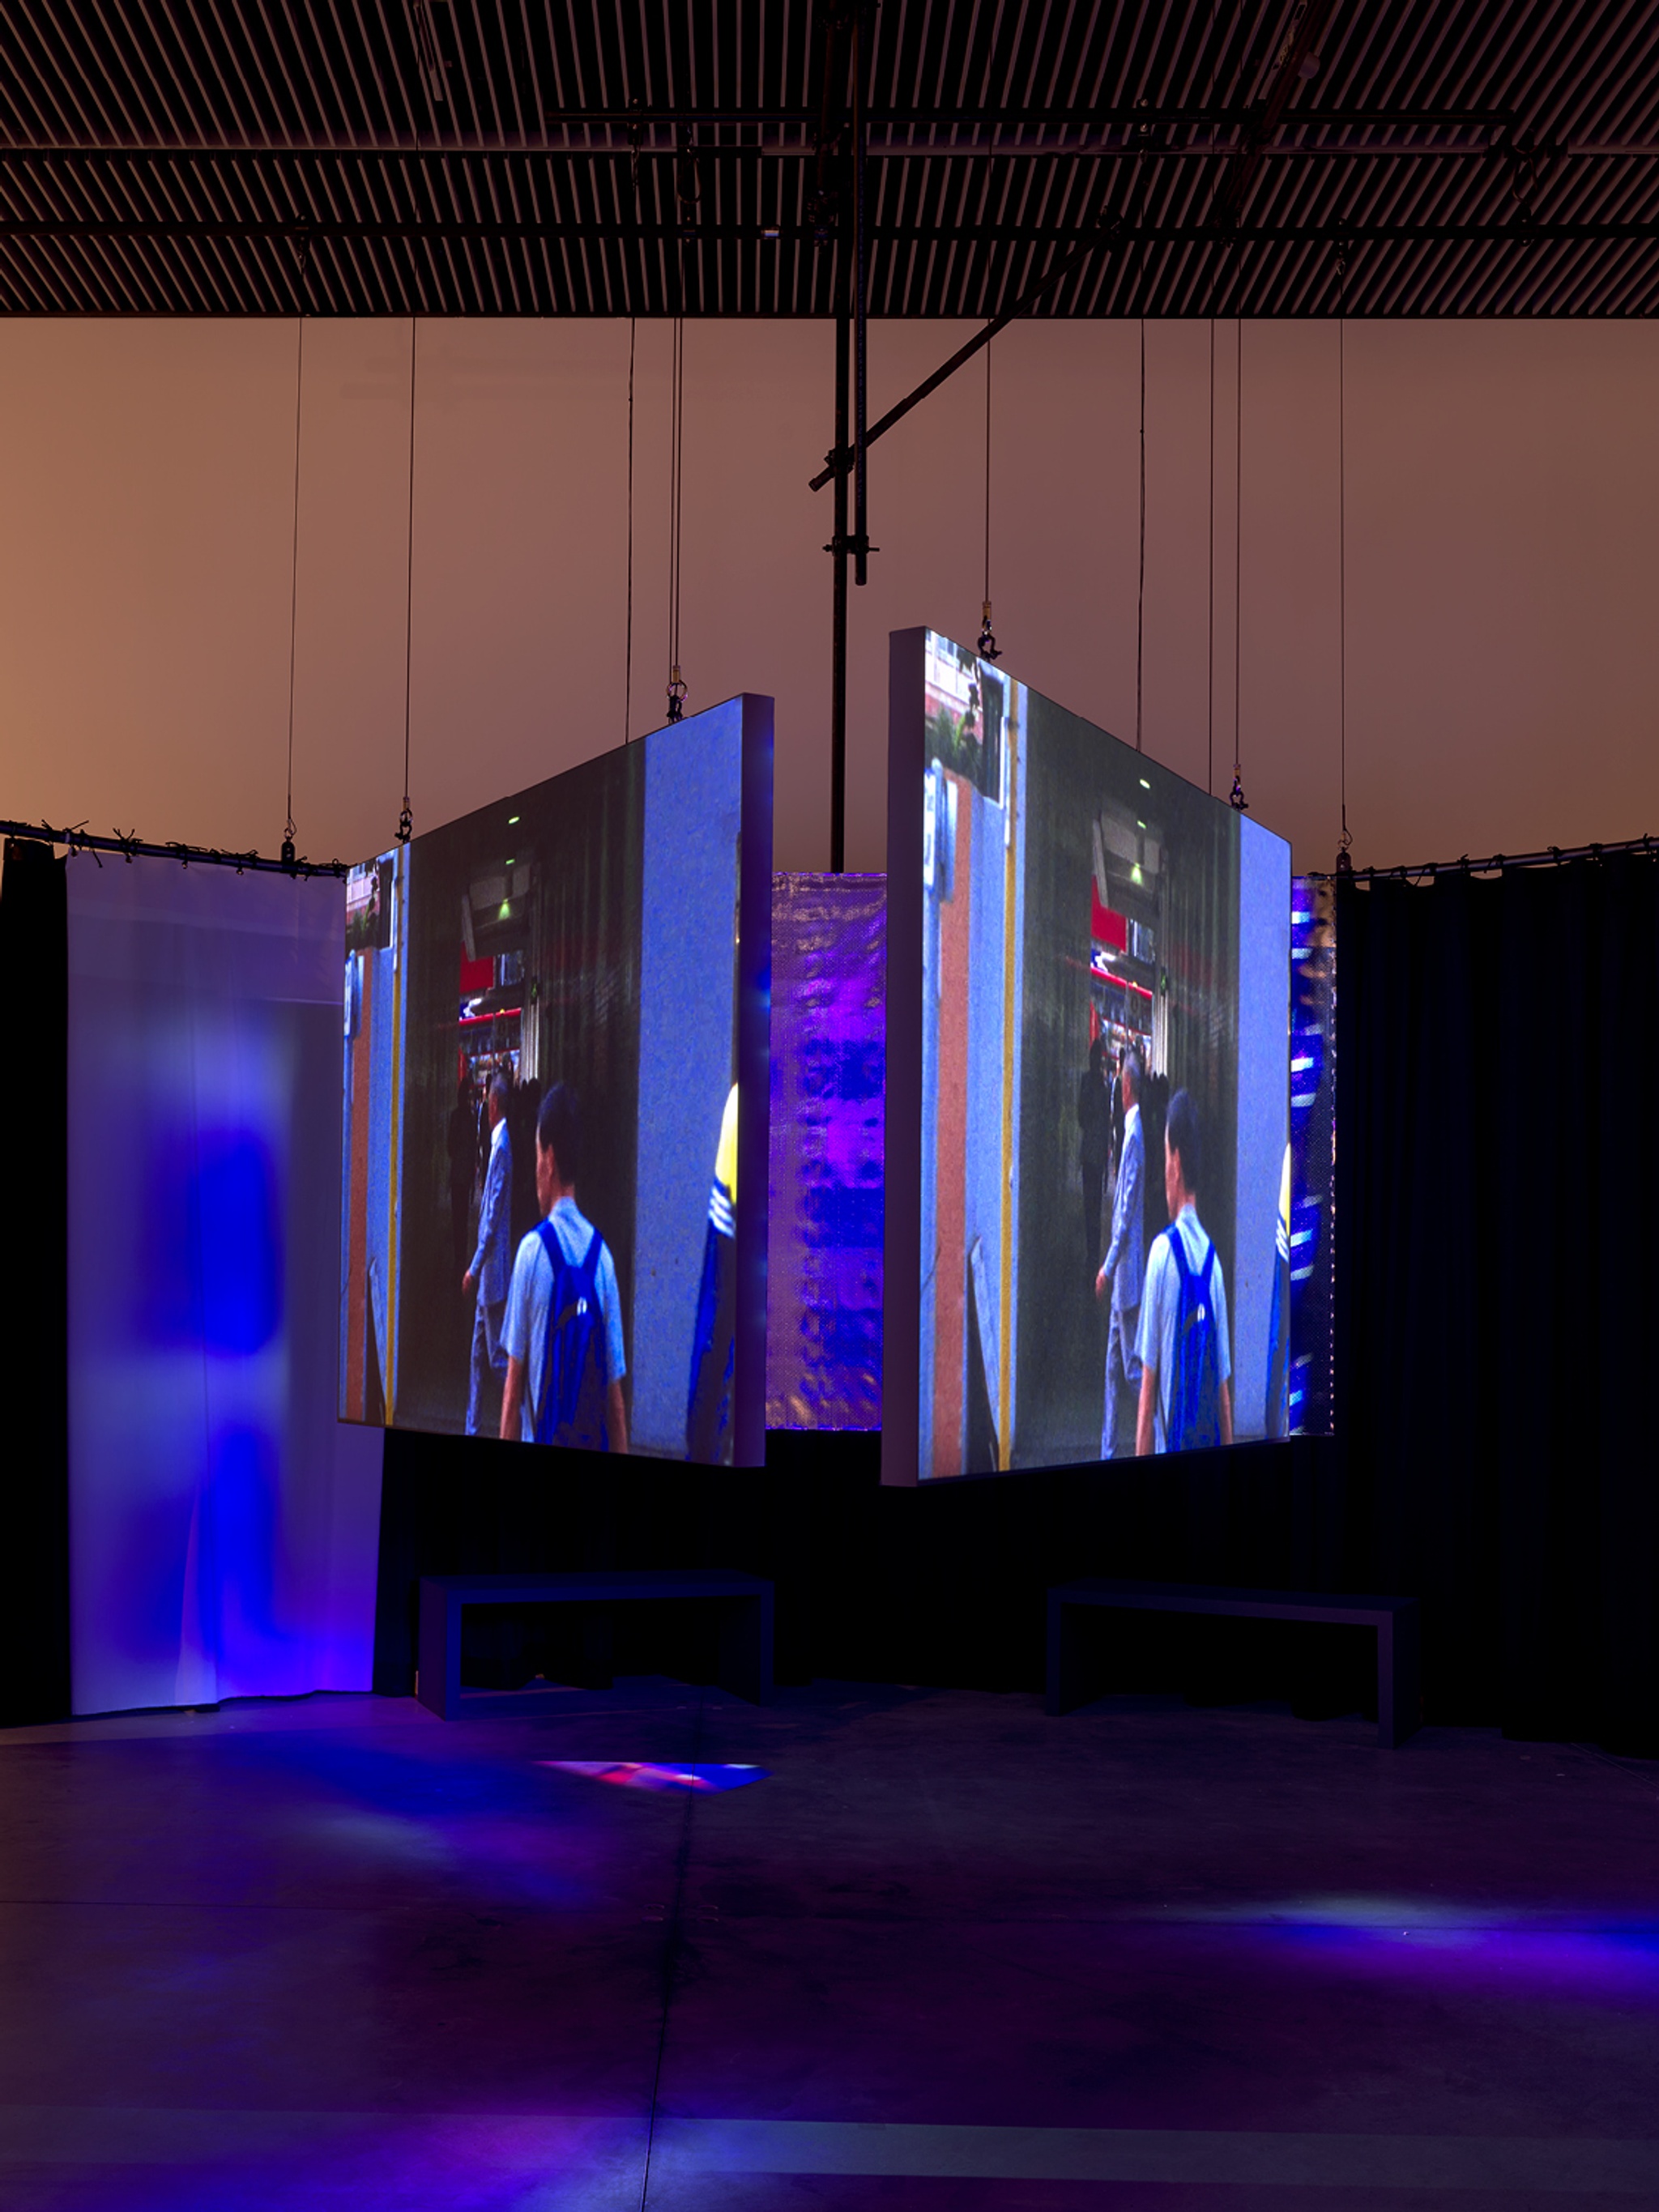 Three video screens hung in a triangular formation in a darkened space awash in bluish light. The screens depict people moving through a cityscape.